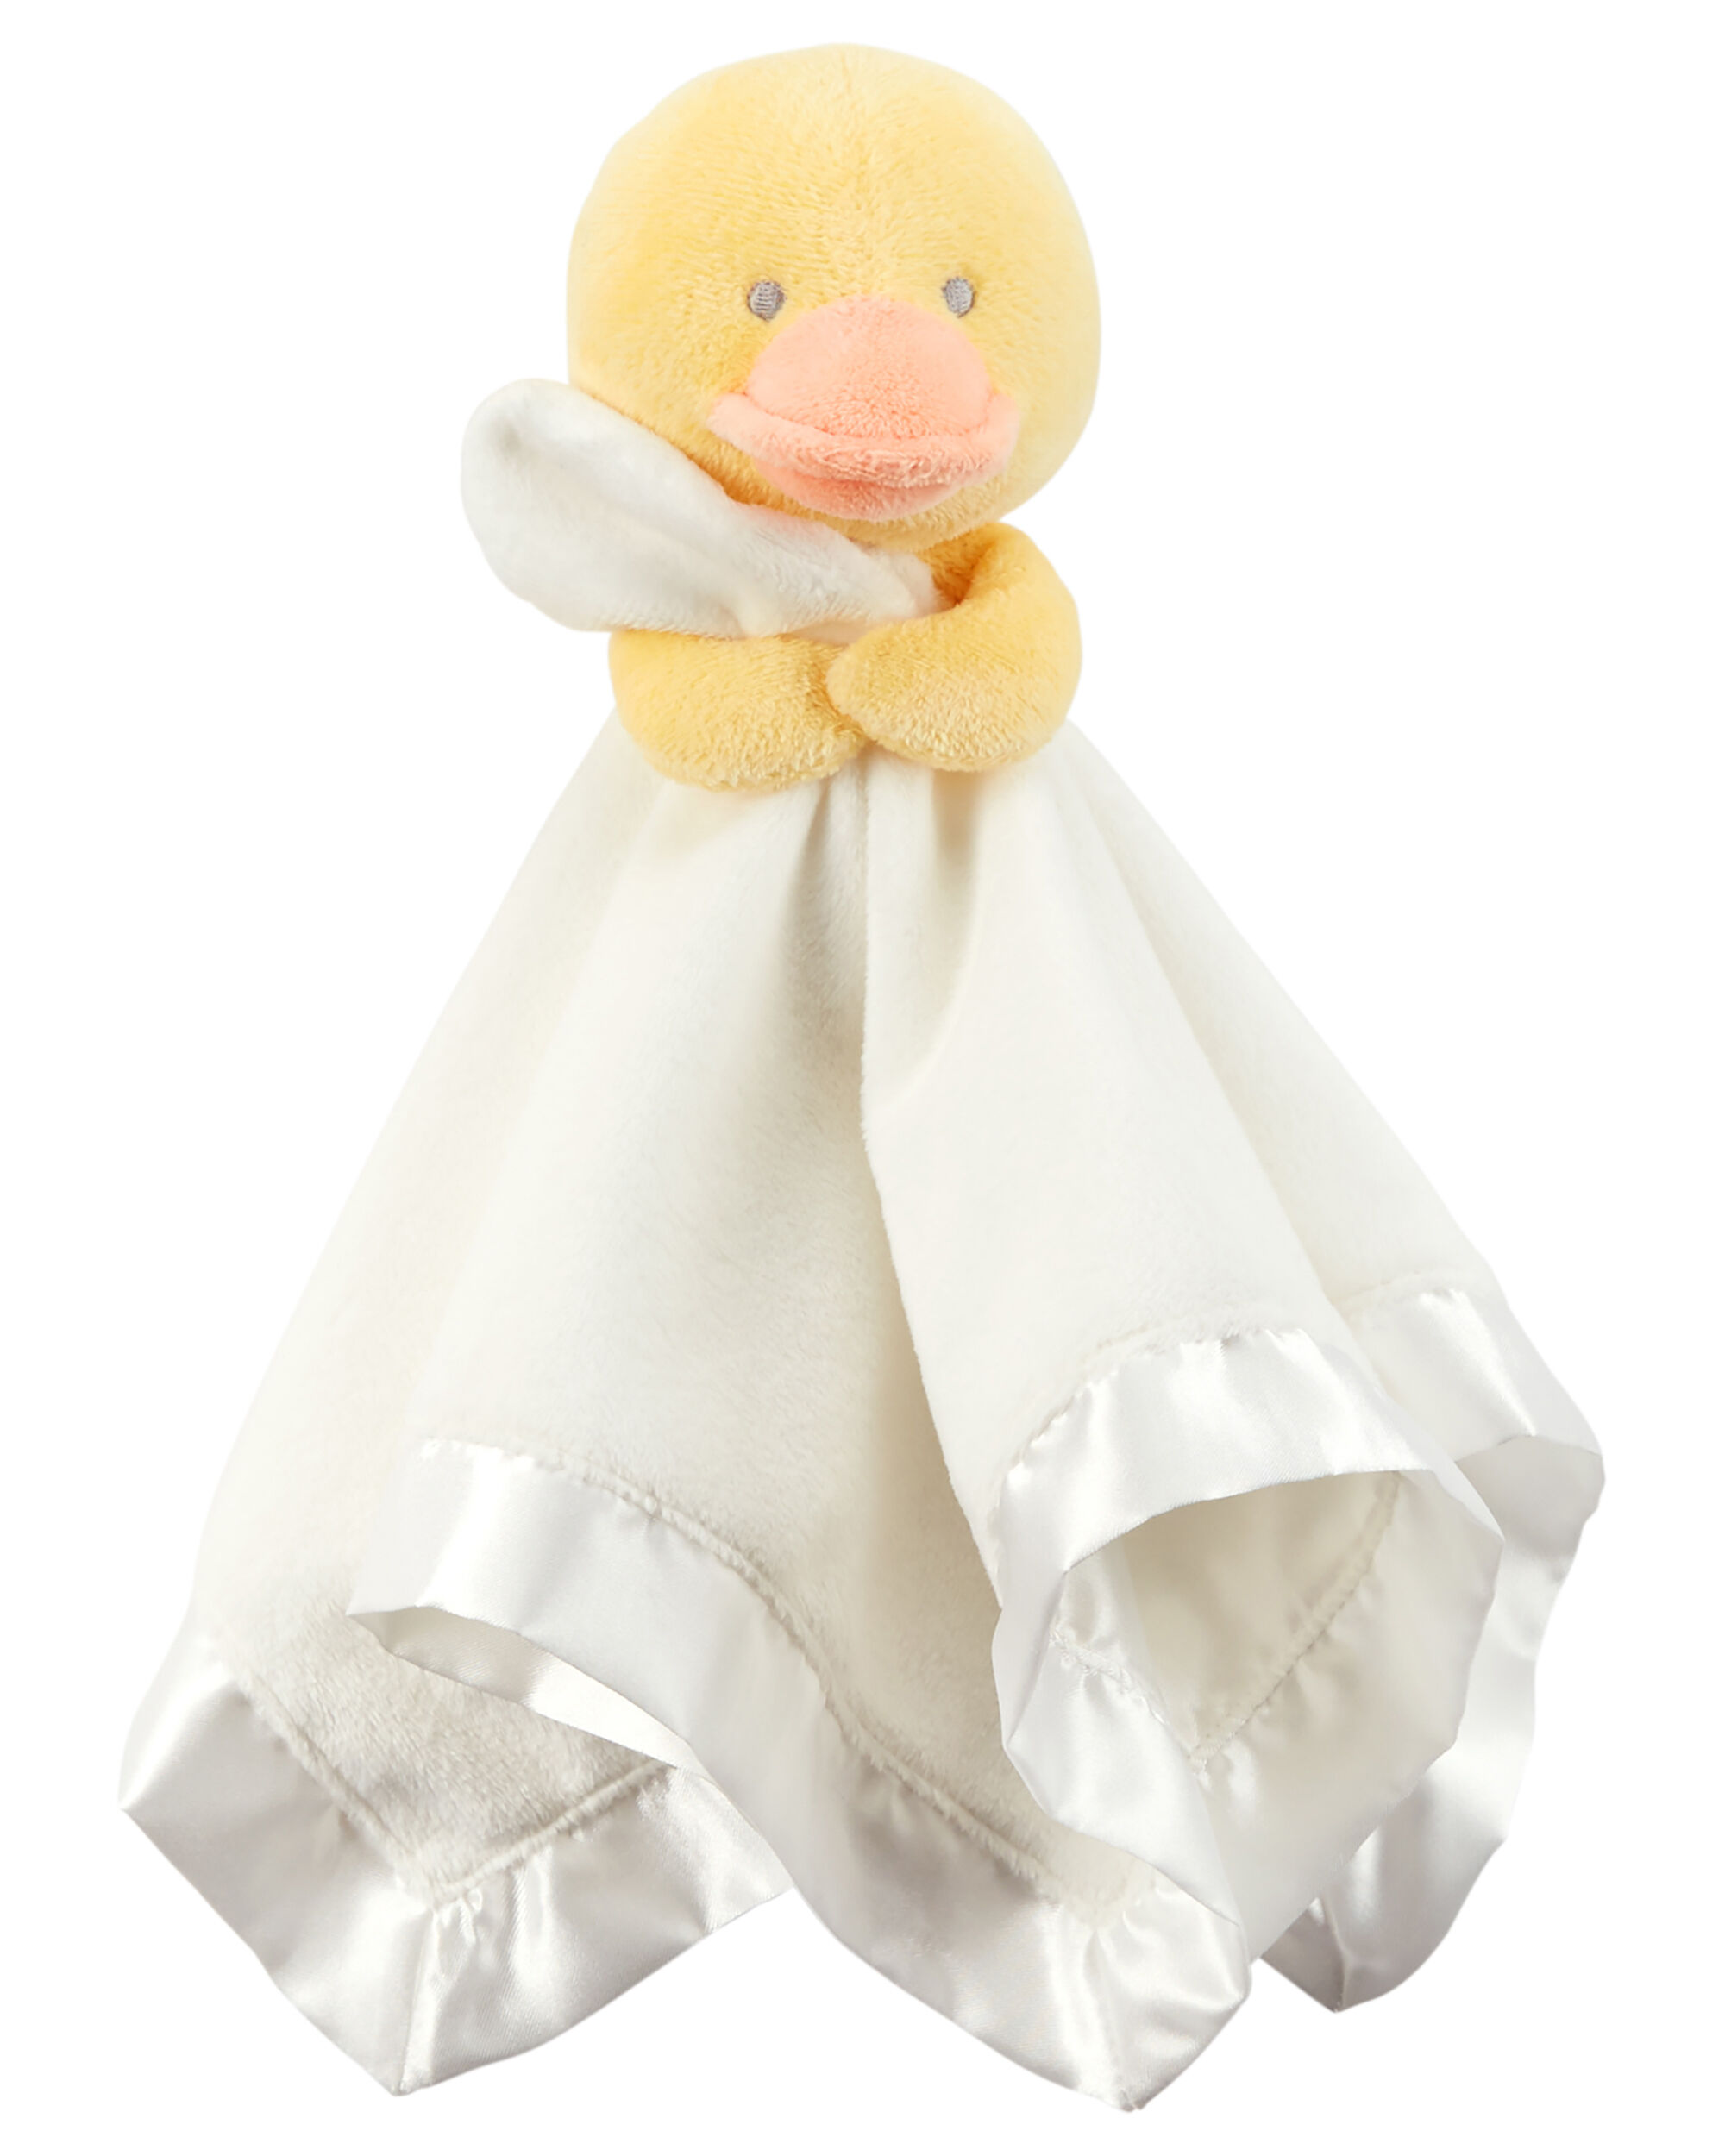 NWT Carters I Love Hugs White Yellow Duck Security Blanket Rattle Lovey Baby Toy 